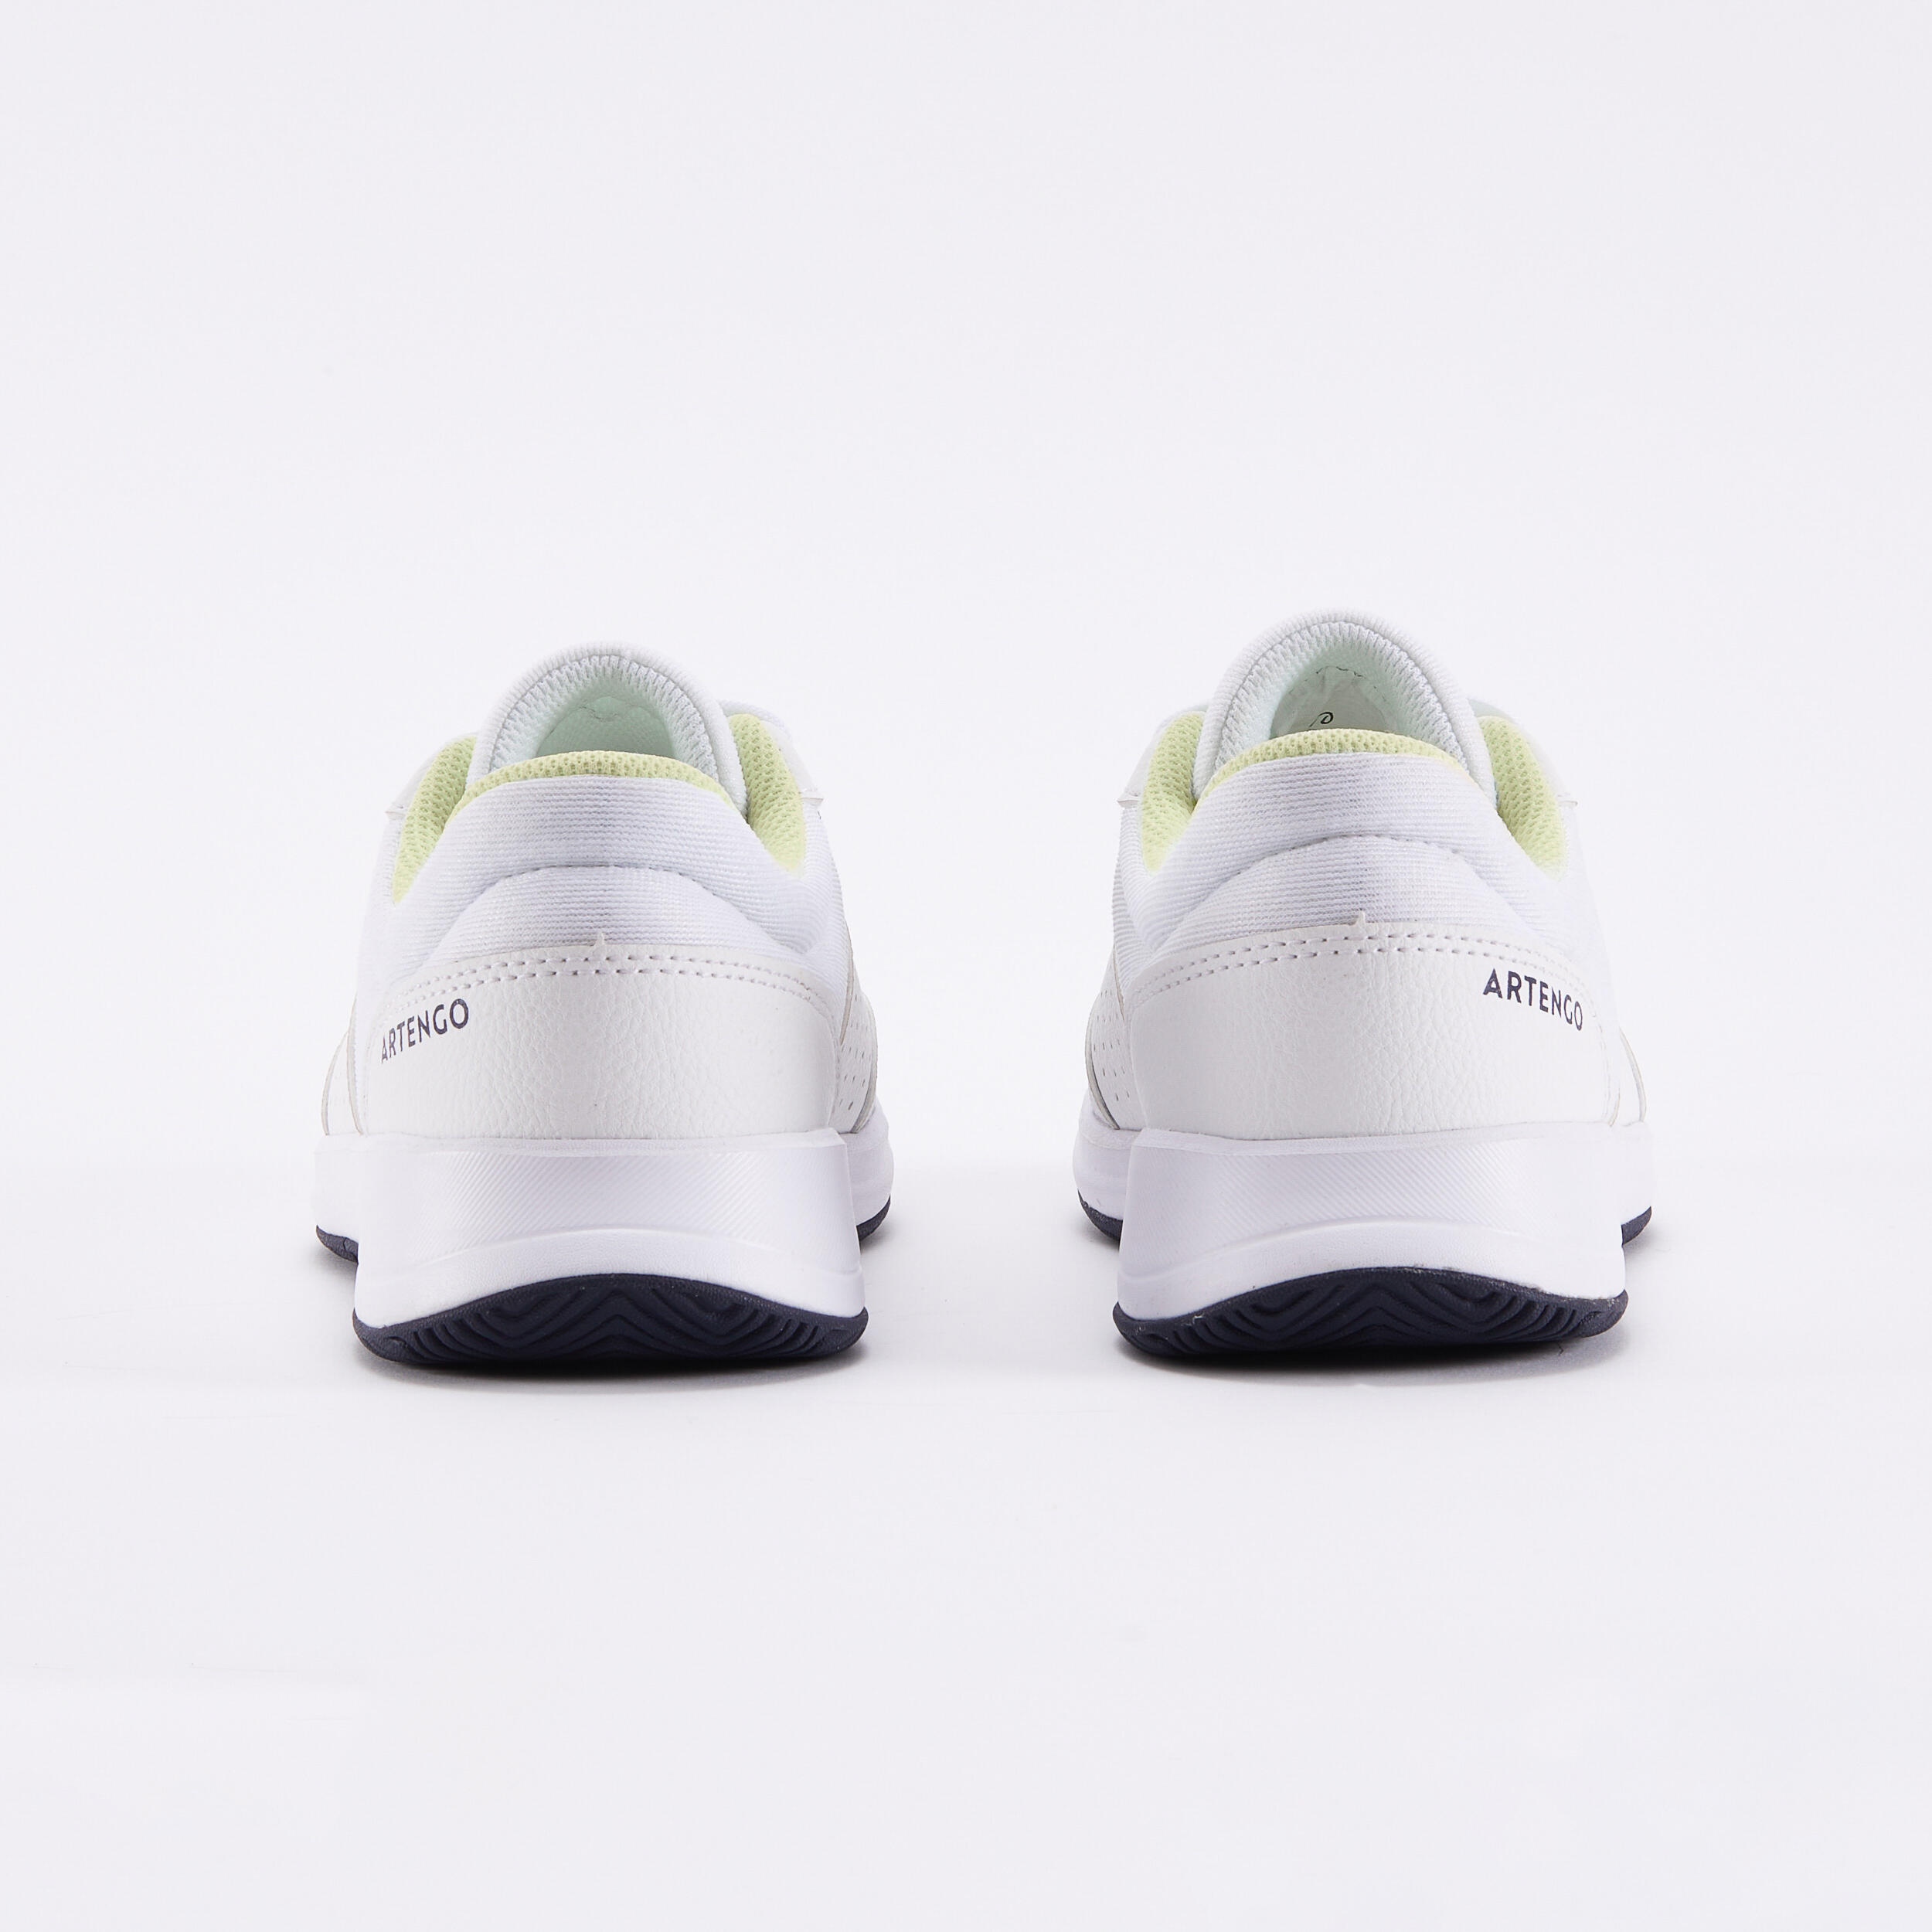 Kids' Lace-Up Tennis Shoes Essential - White & Yellow 2/9